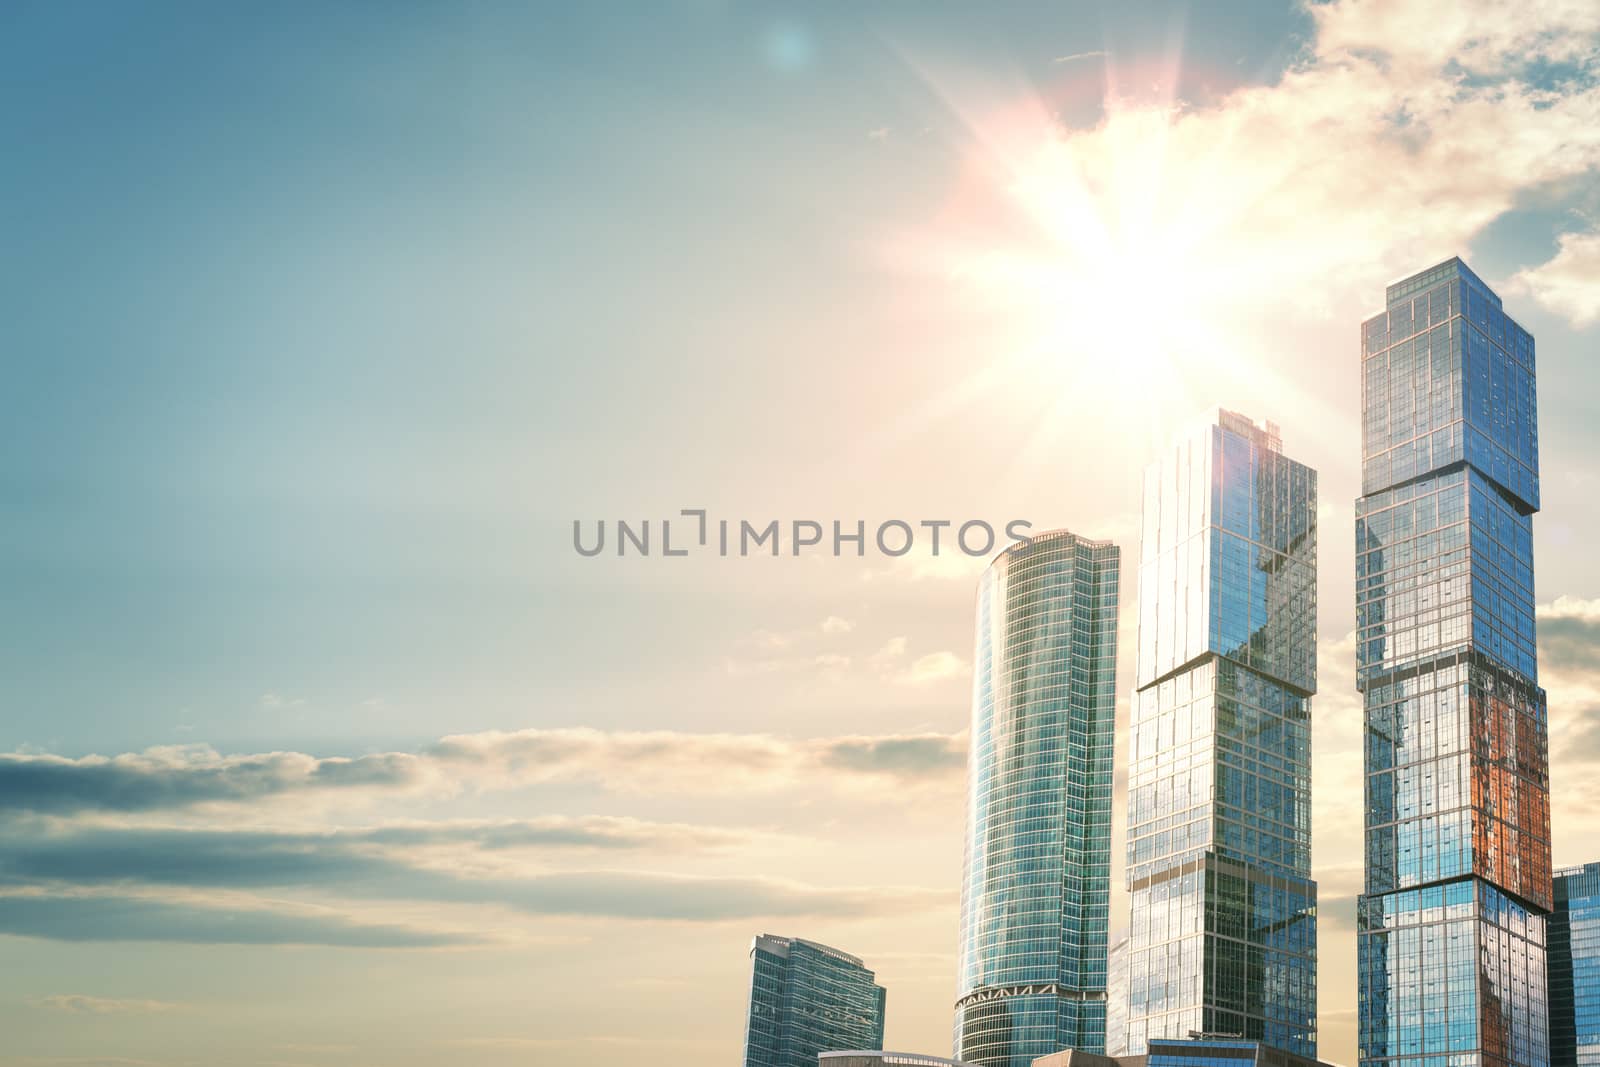 Several skyscrapers with glass facades against a beautiful sunrise. The concept of growth and success